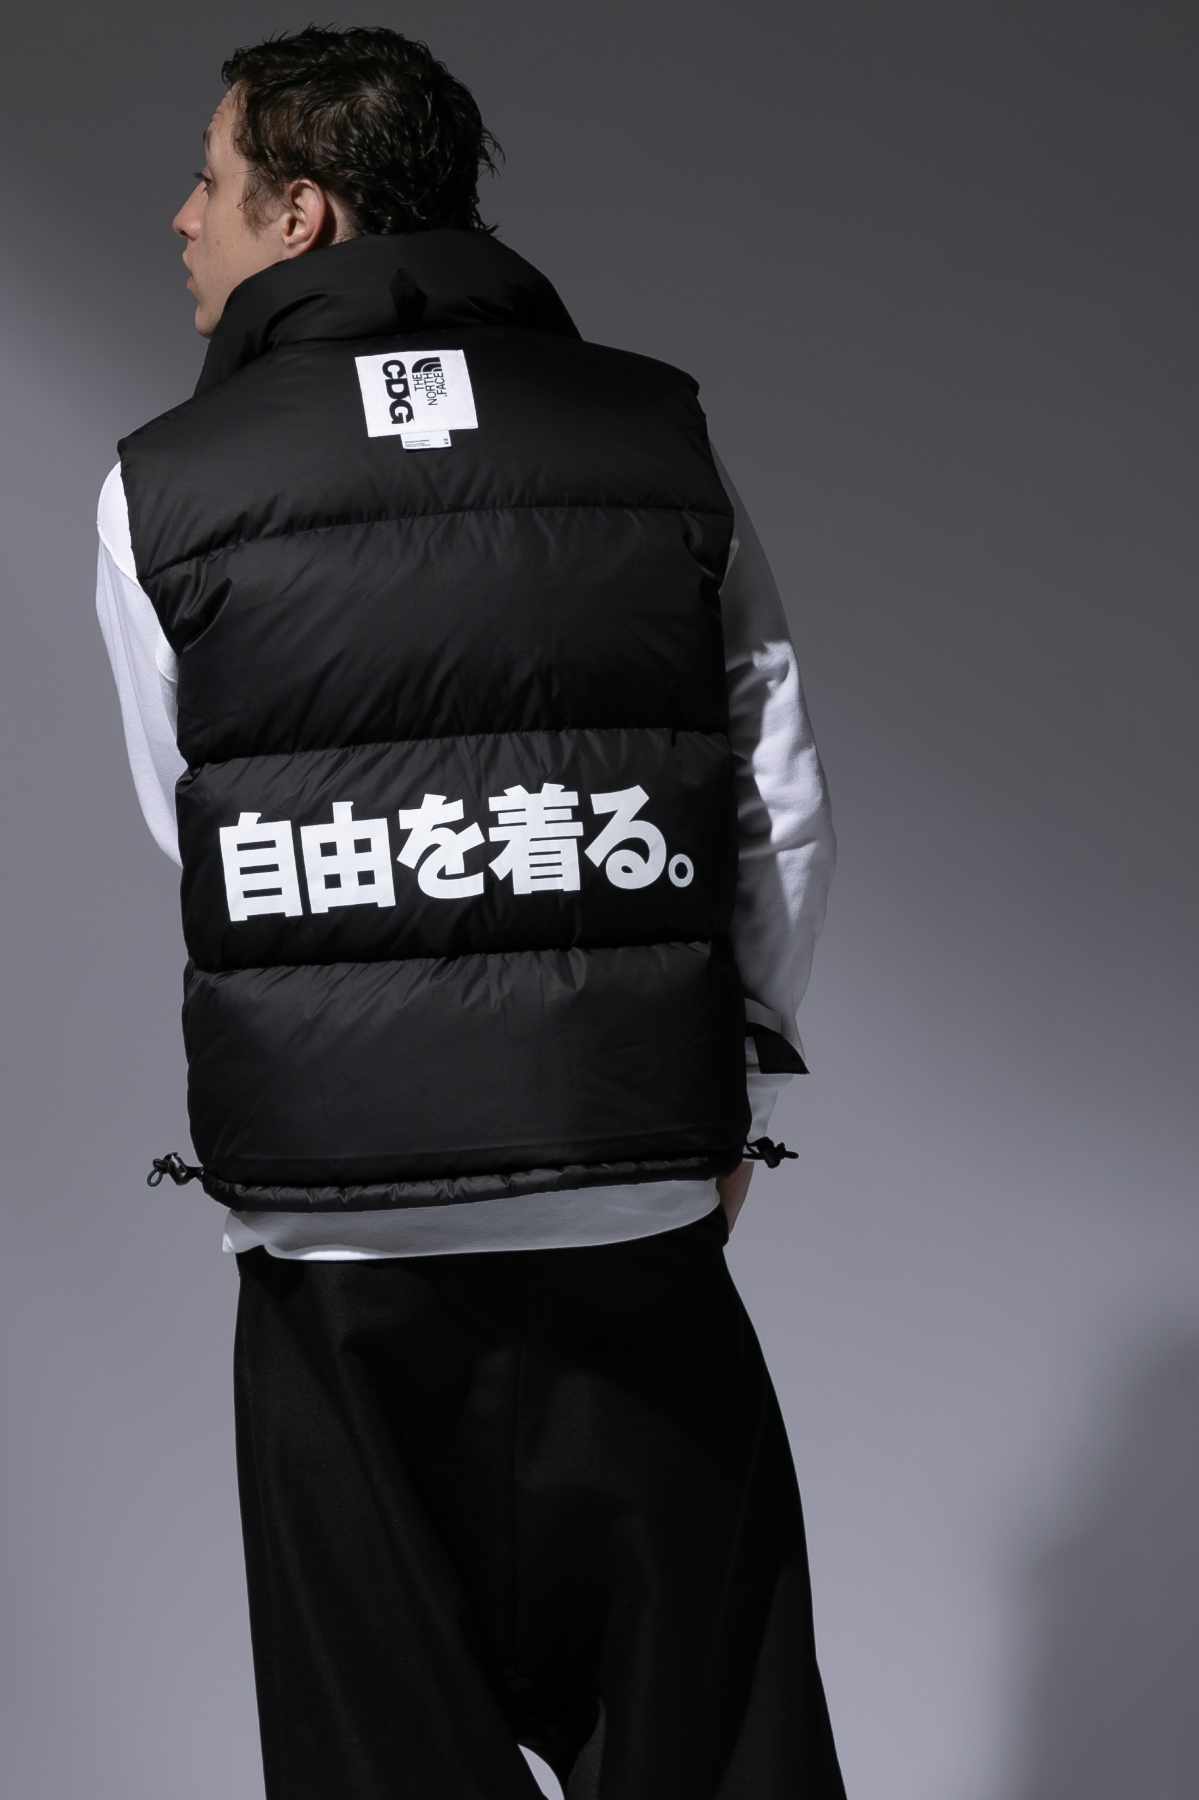 A model wears the CDG x The North Face collaboration, with a black puffer vest